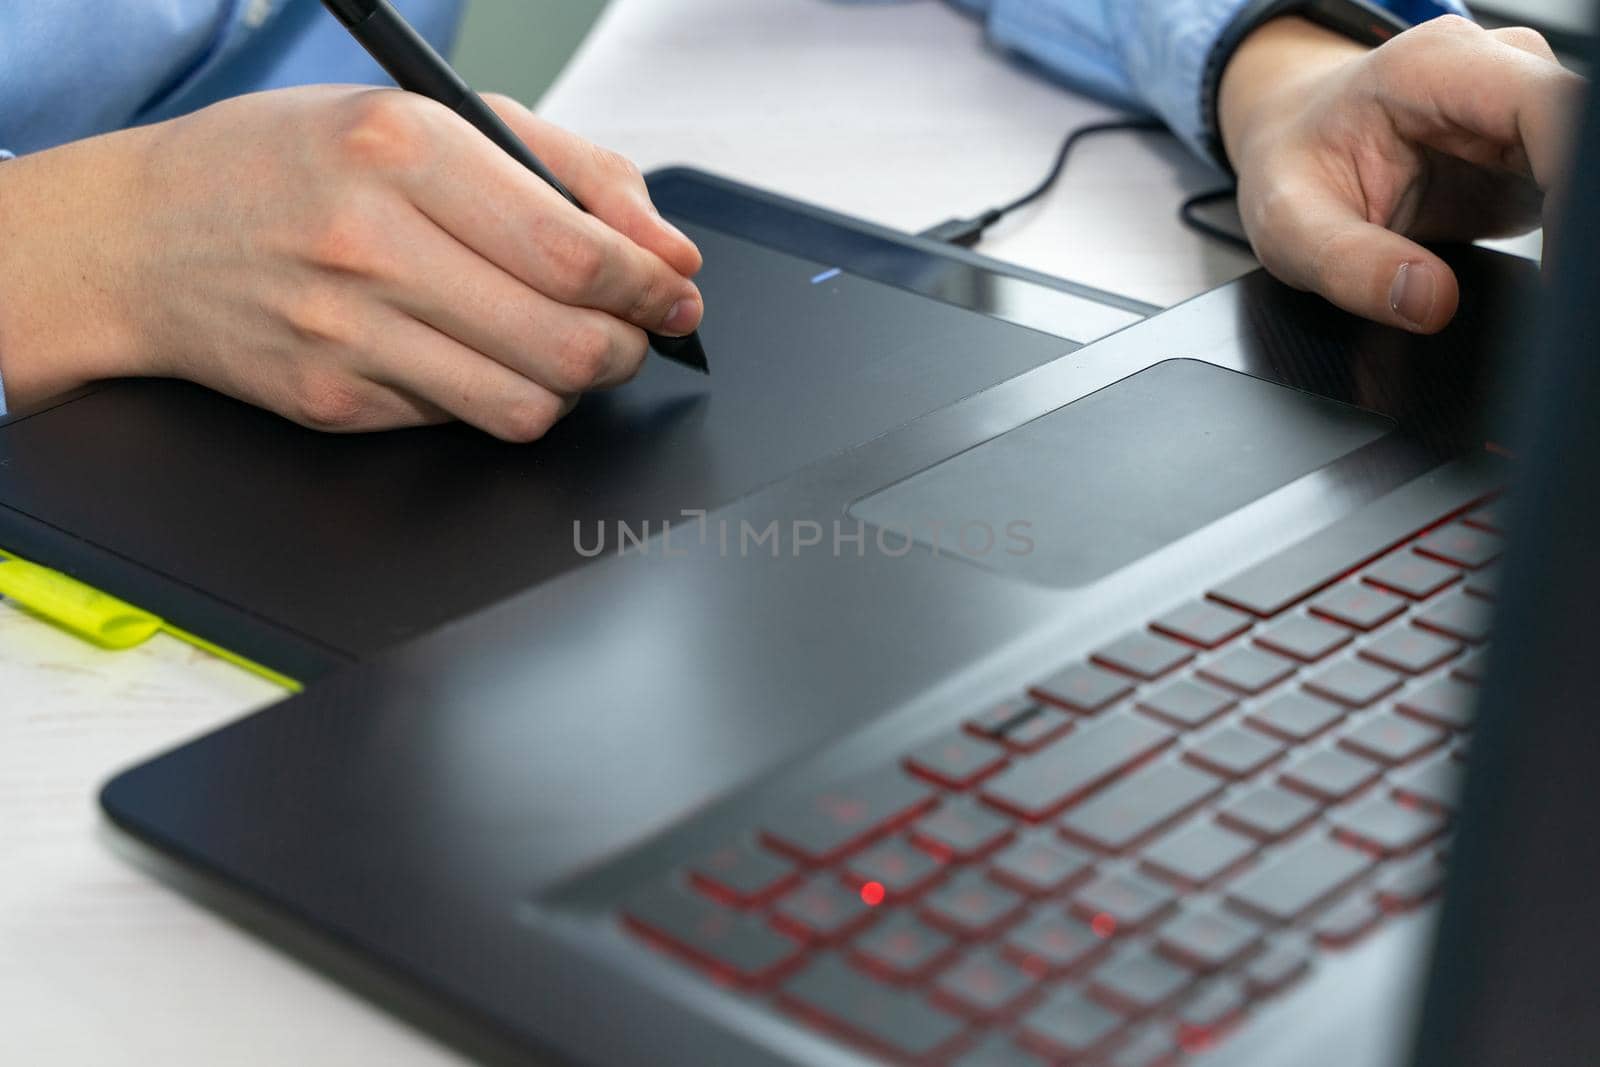 Graphic designer using digital tablet and computer in office by Lena_Ogurtsova